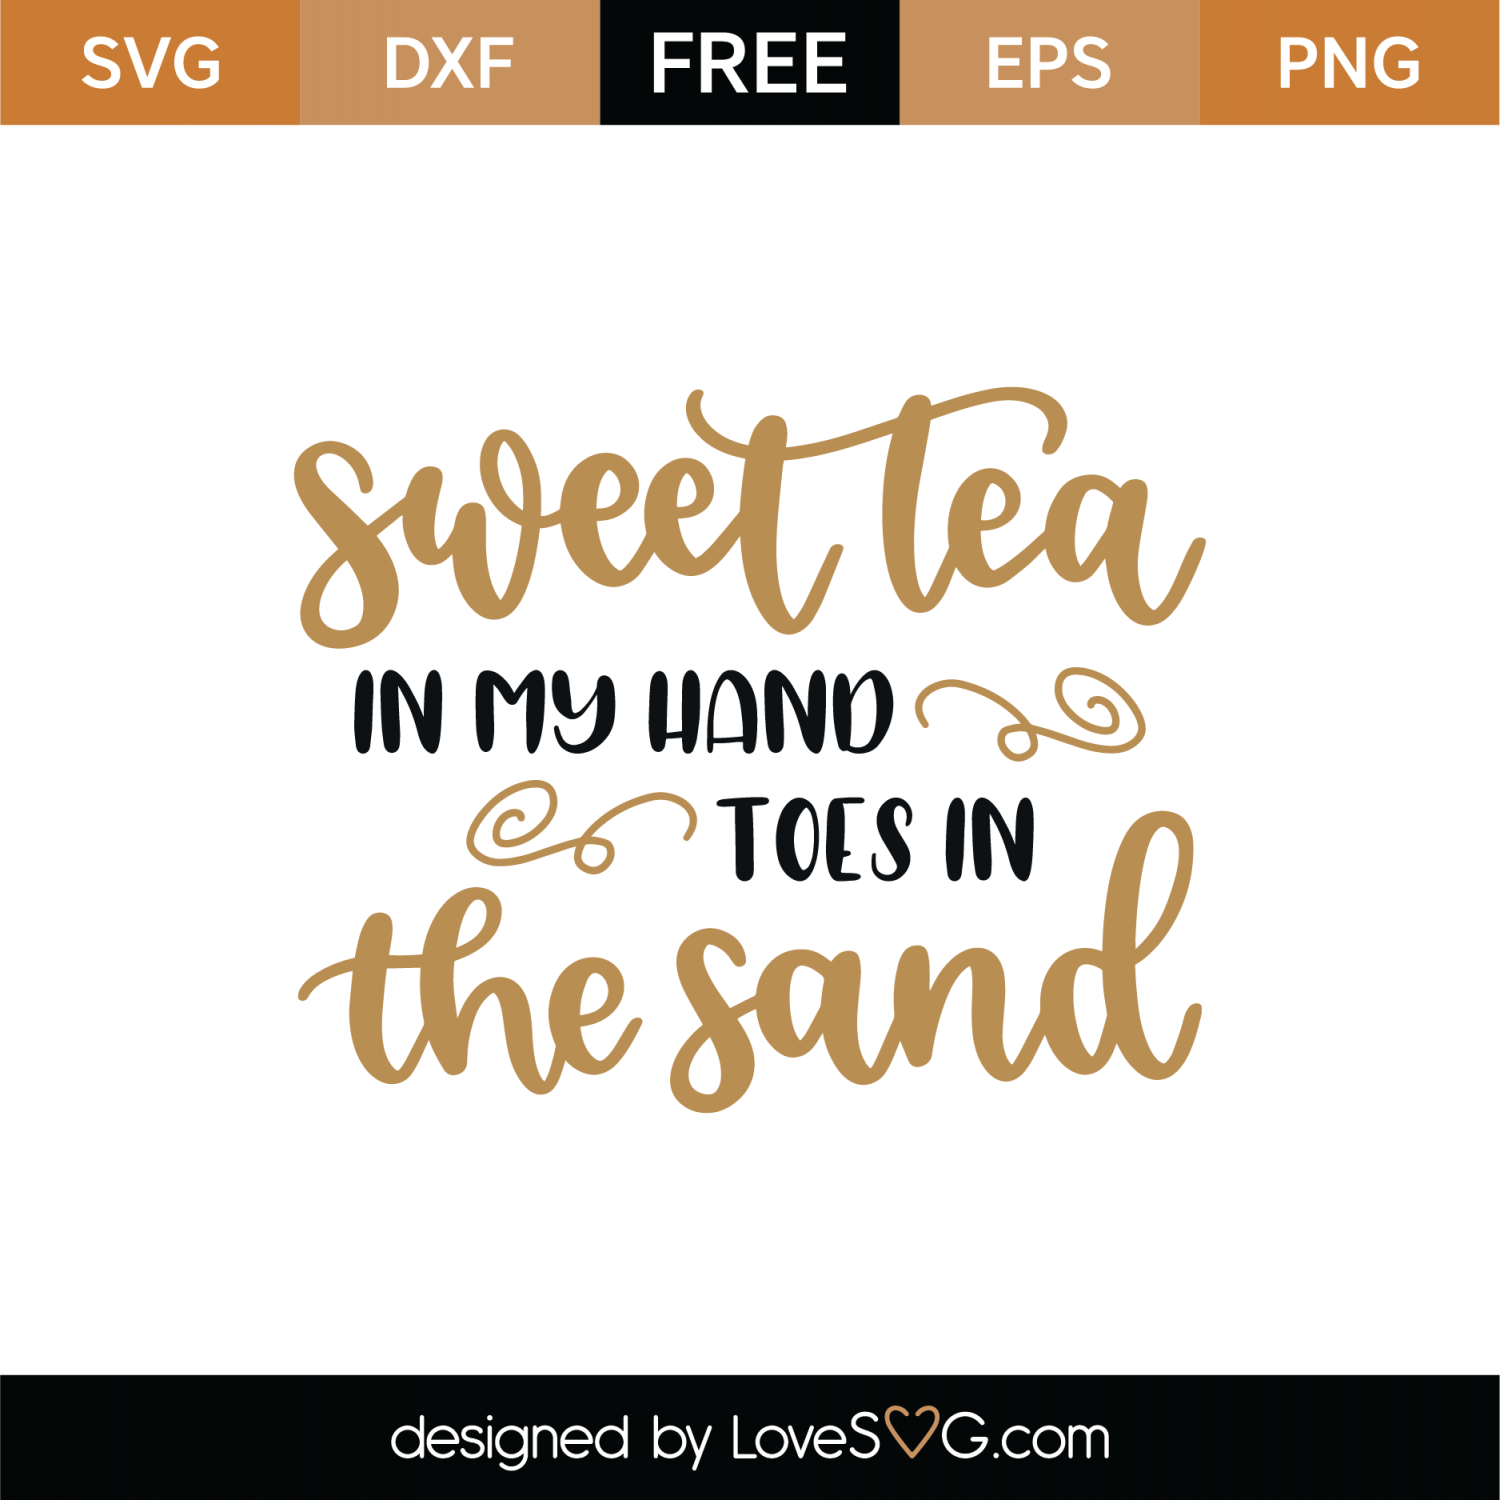 Download Free Sweet Tea In My Hand Toes In The Sand SVG Cut File | Lovesvg.com